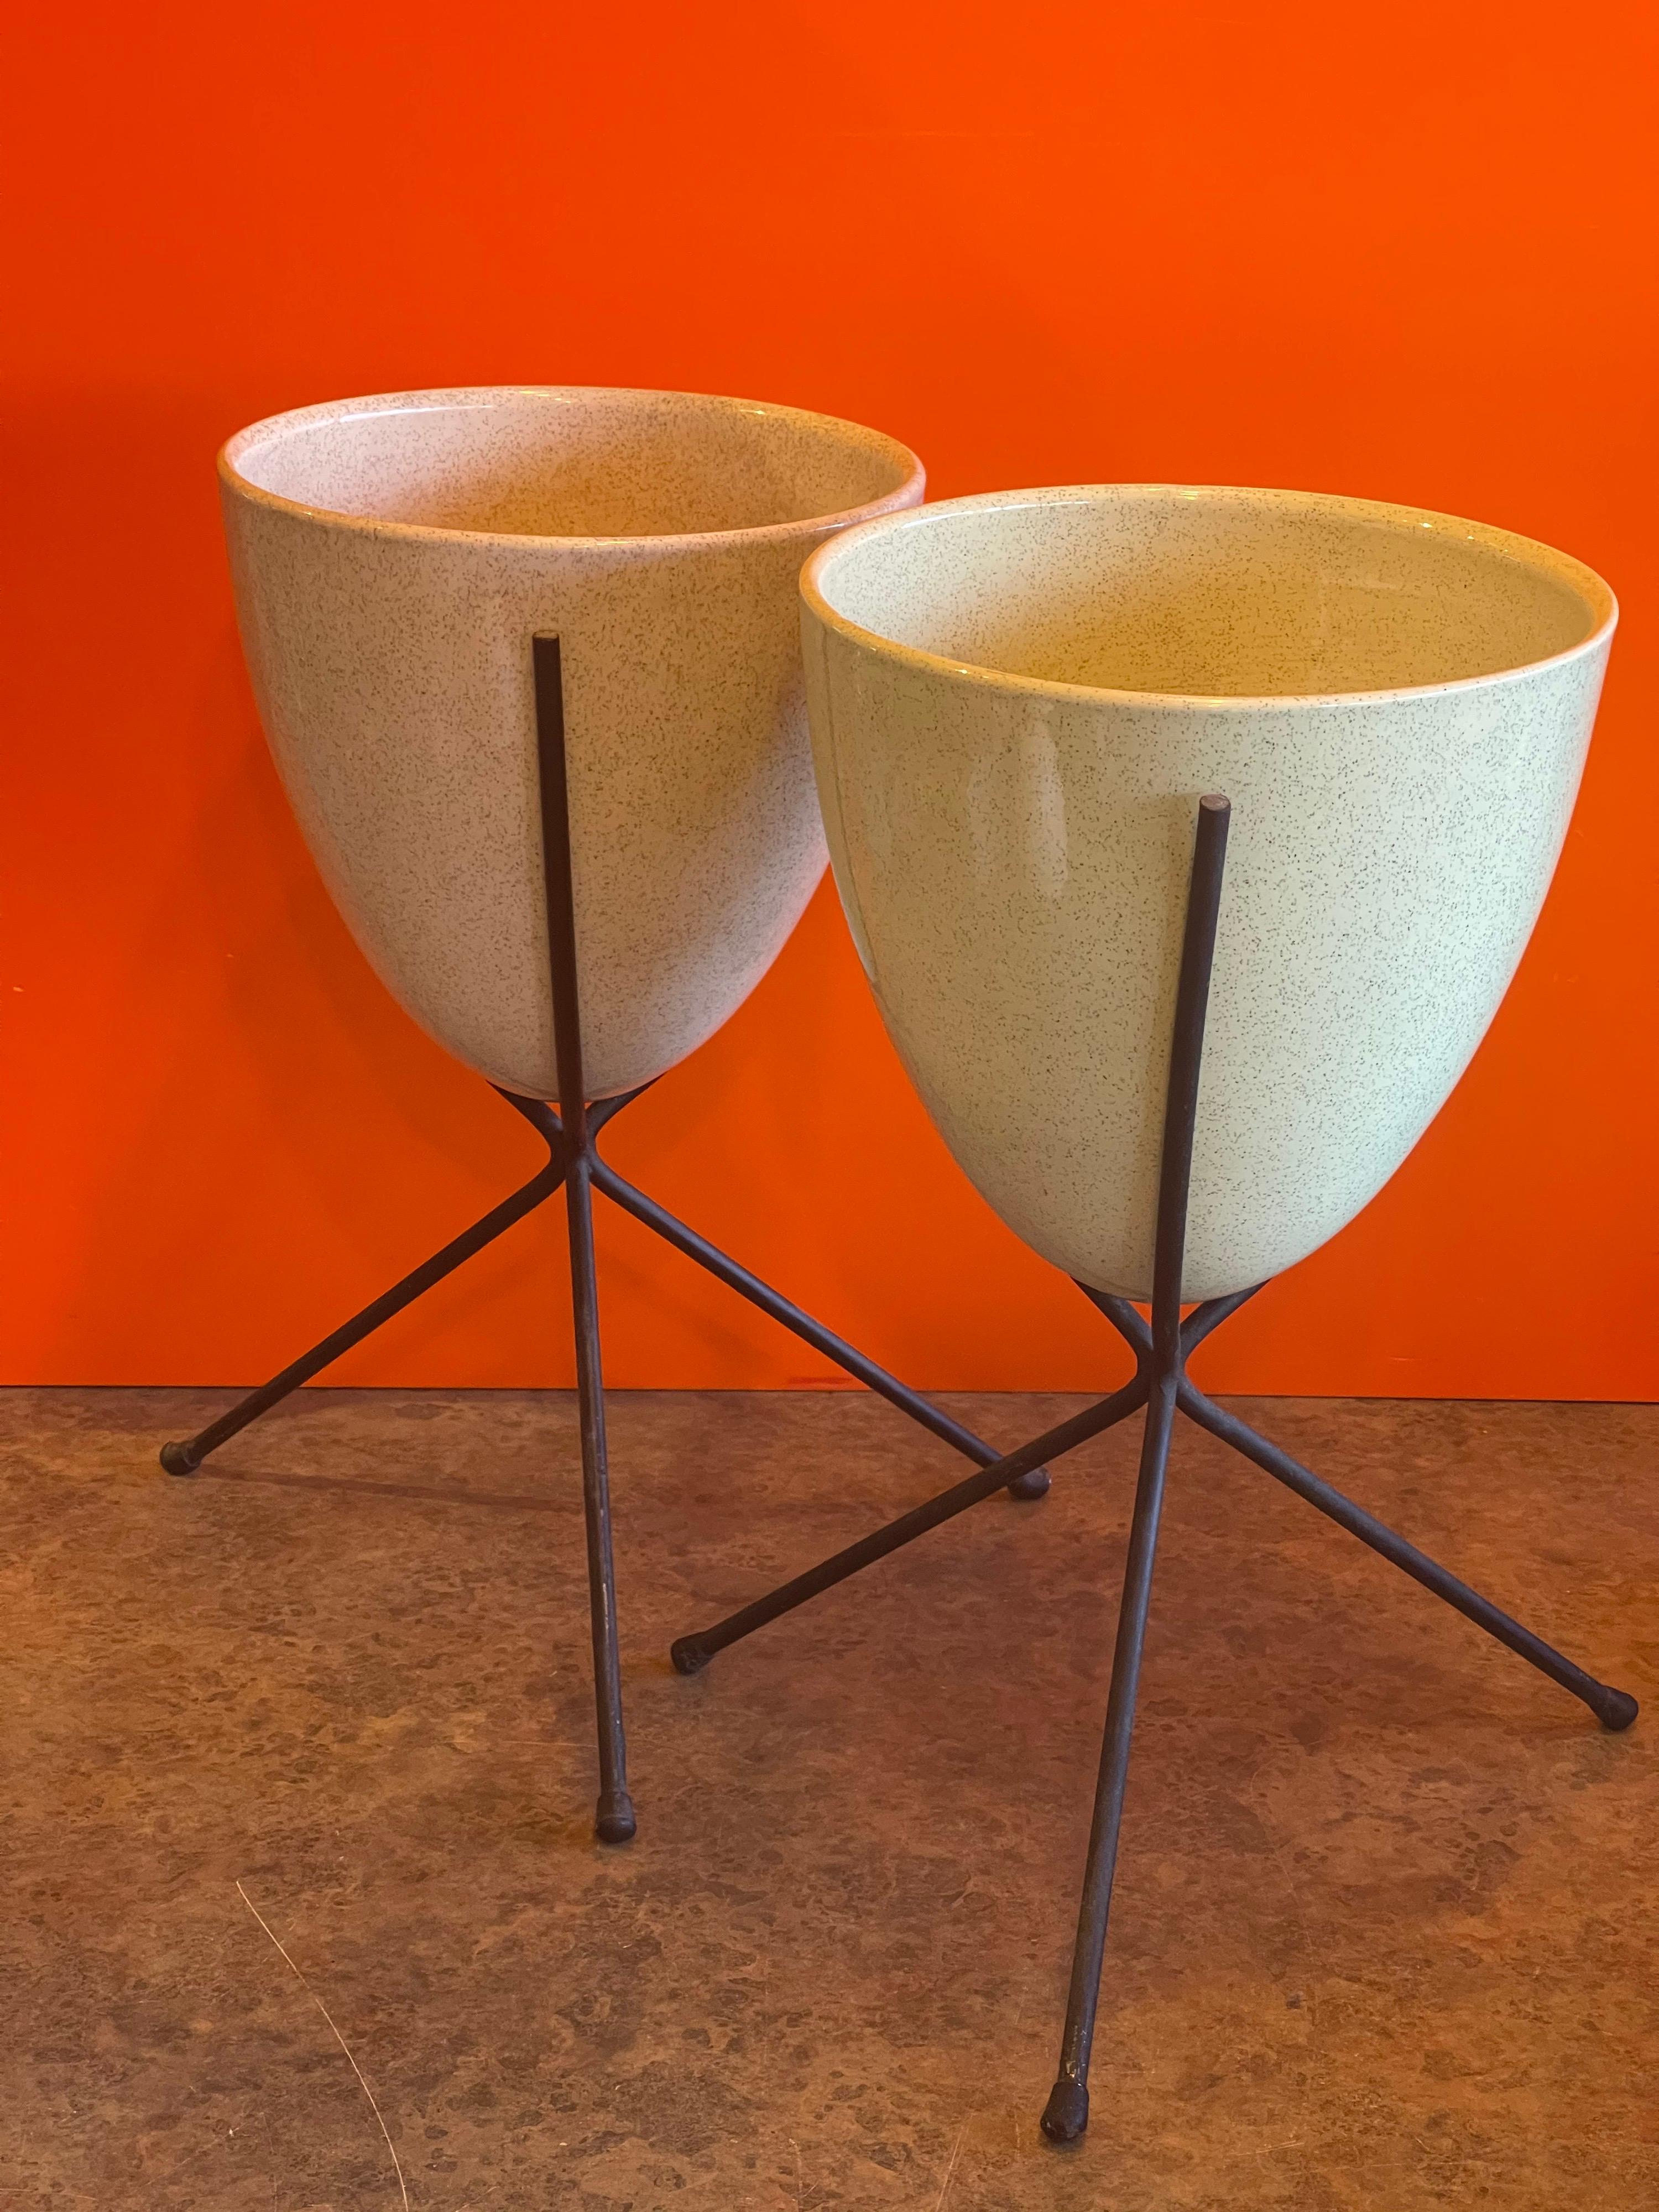 American Rare Pair of Atomic Age Ceramic Bullet Planters on the Metal Stands by Bauer For Sale